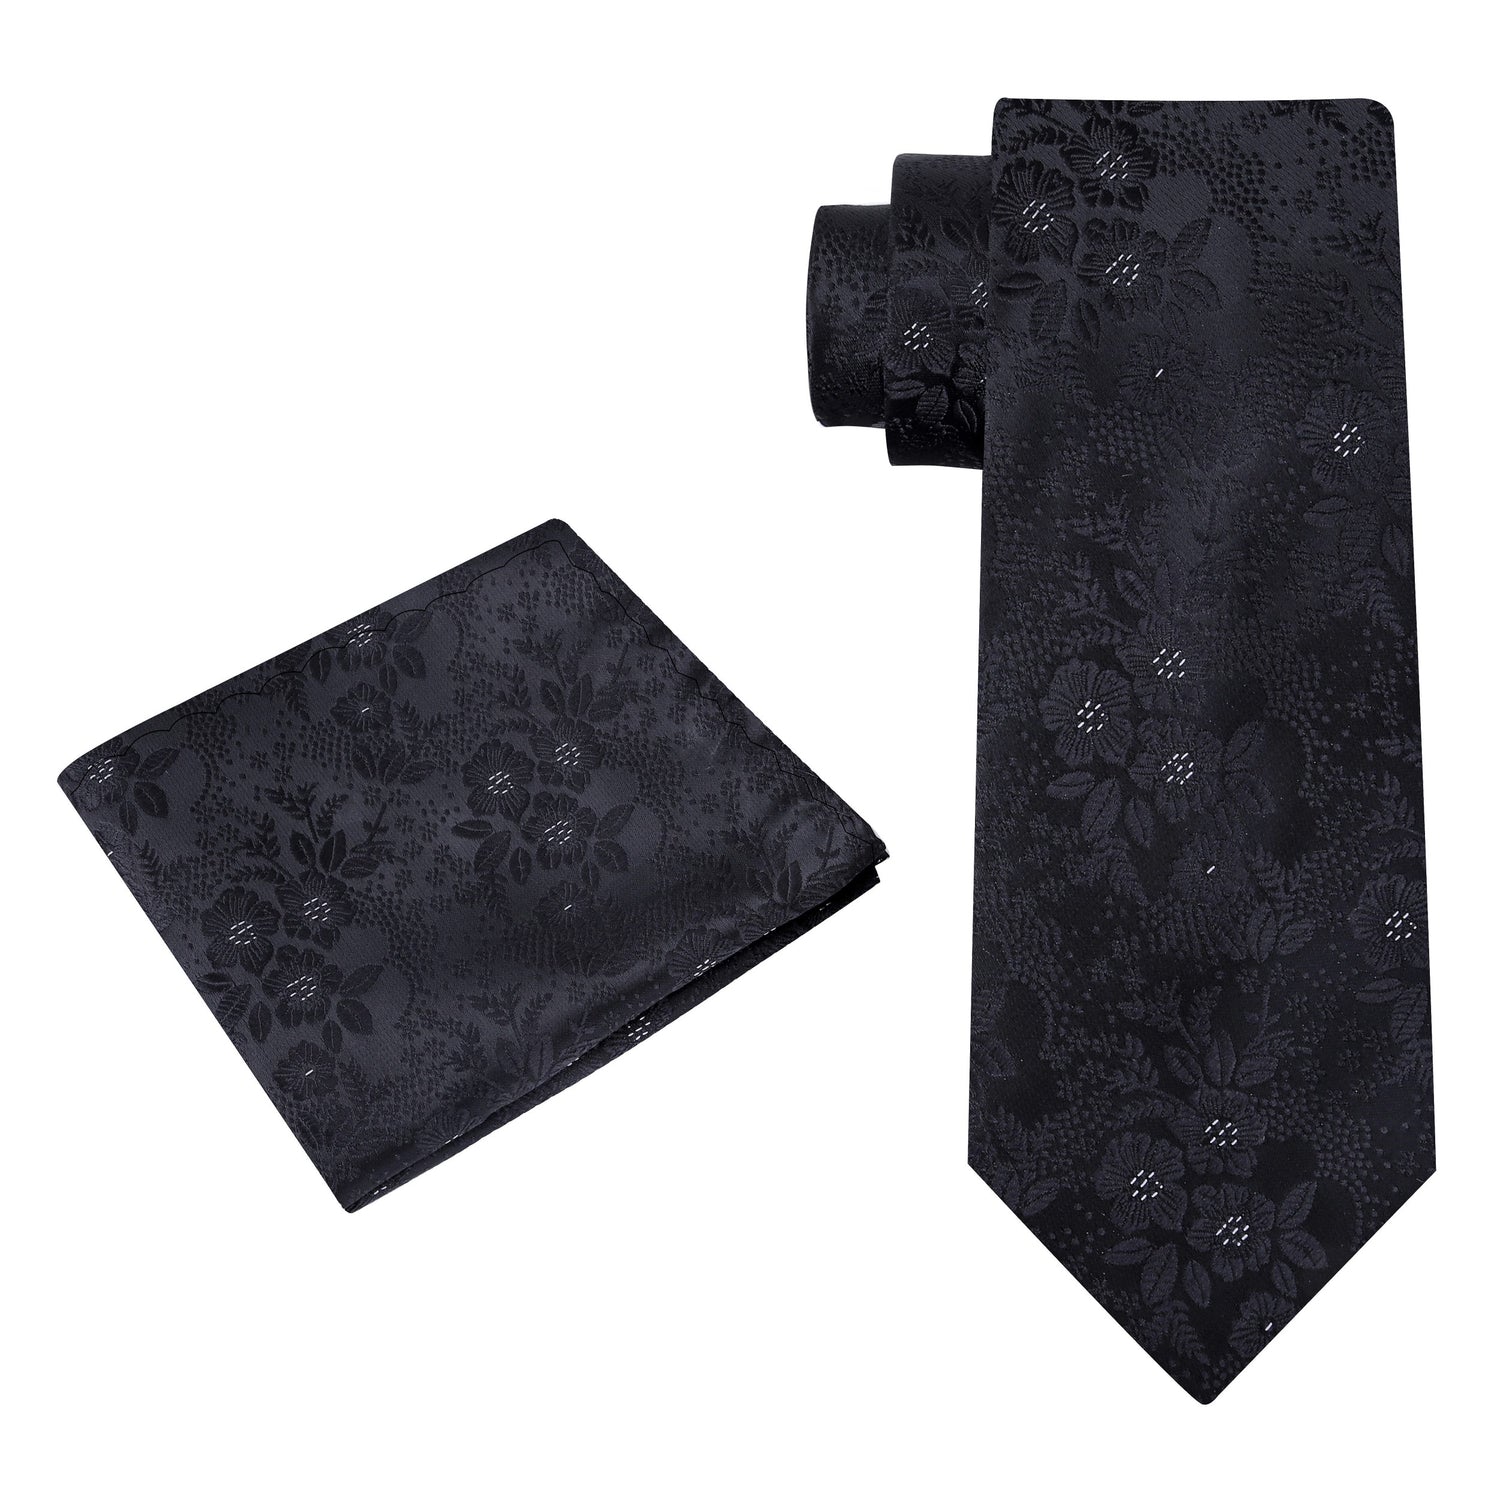 Alt View: A Black With White Floral Pattern Necktie With Matching Pocket Square